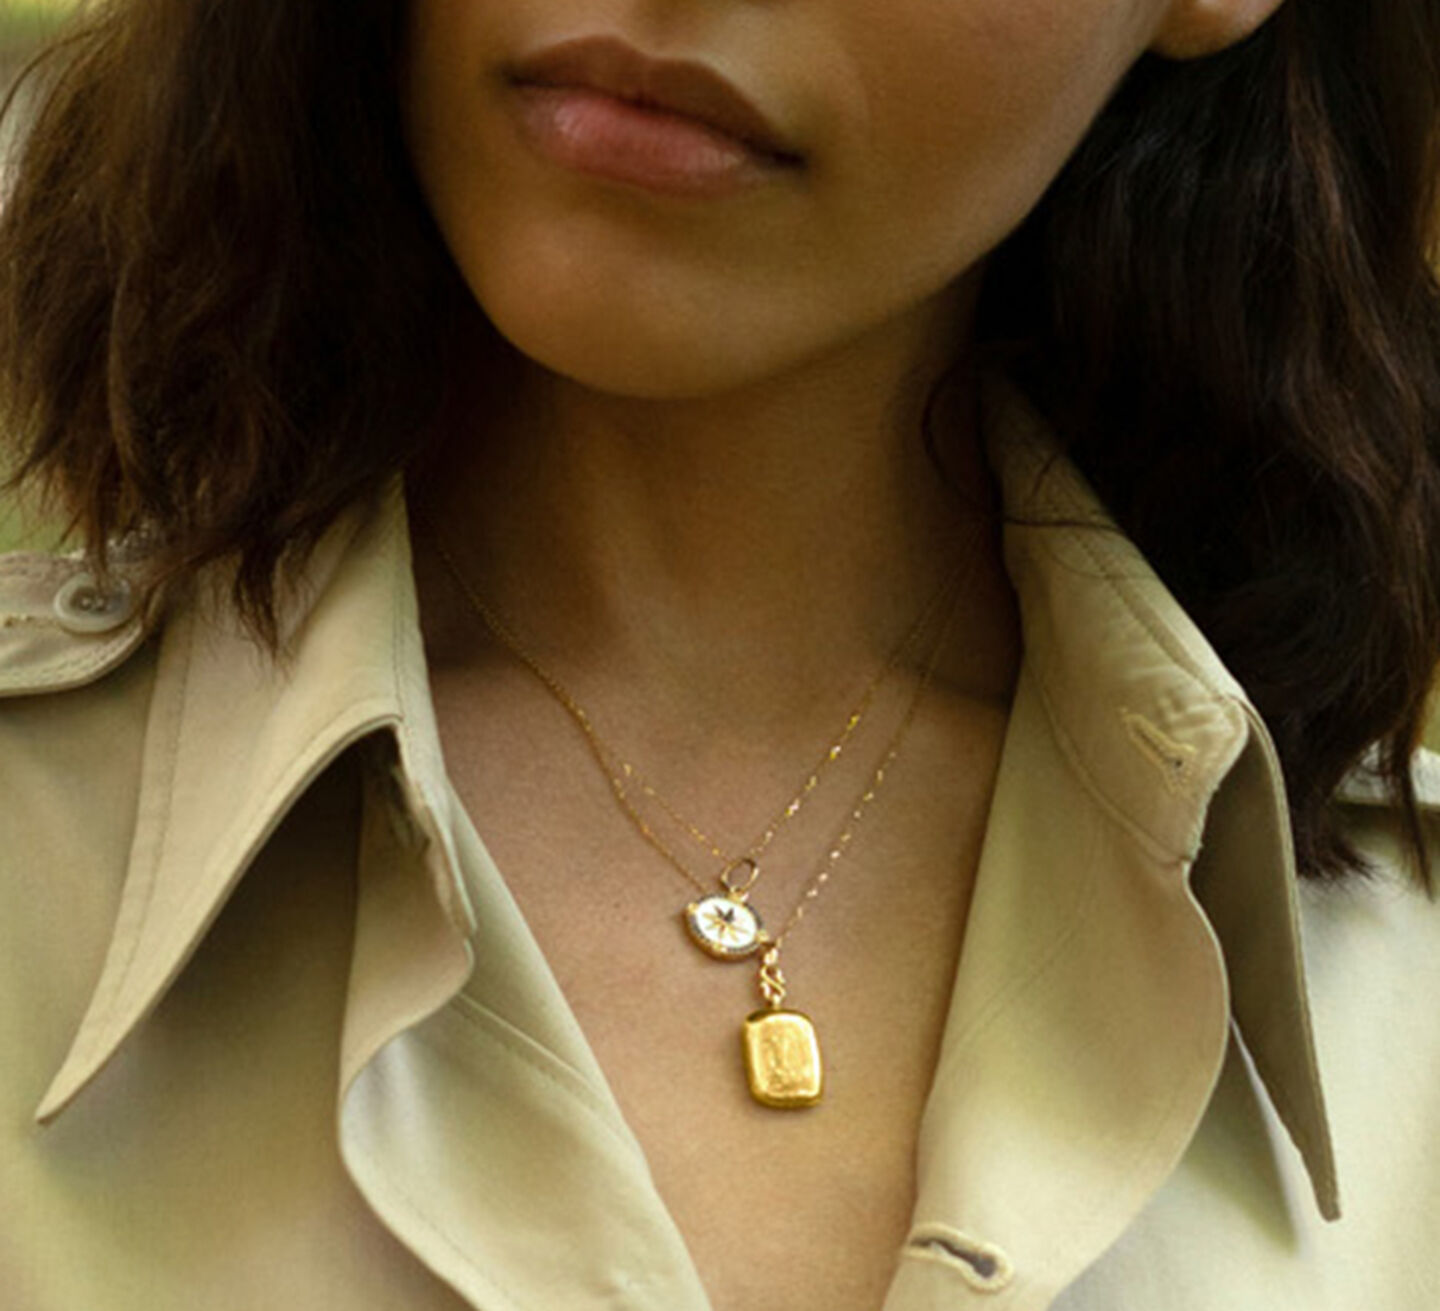 model wearing a gold and a silver locket